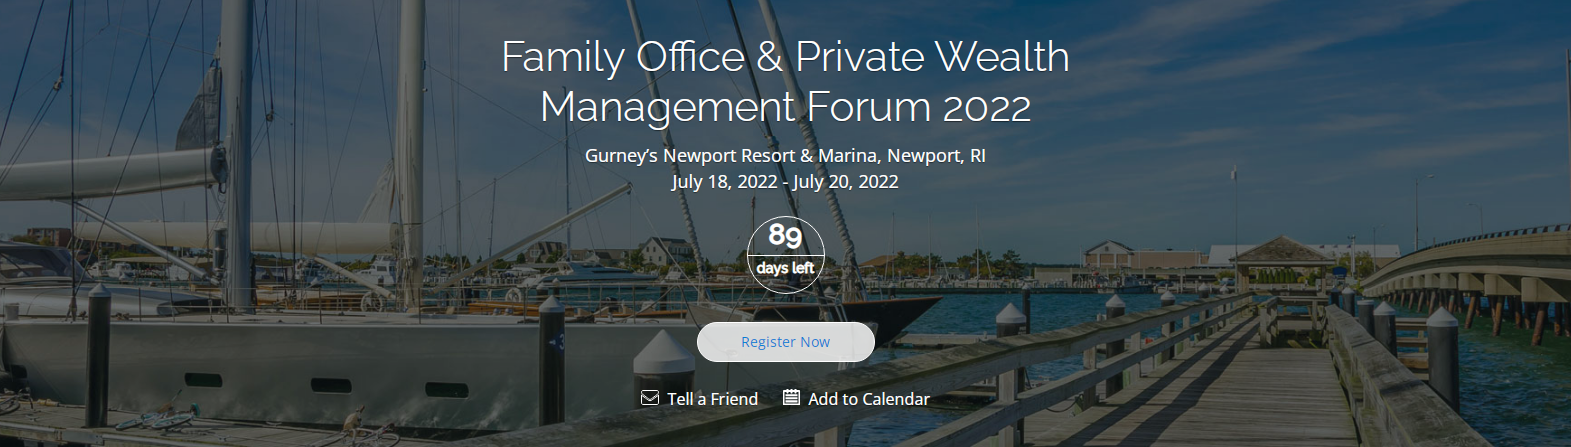 Family Office & Private Wealth Management Forum 2022